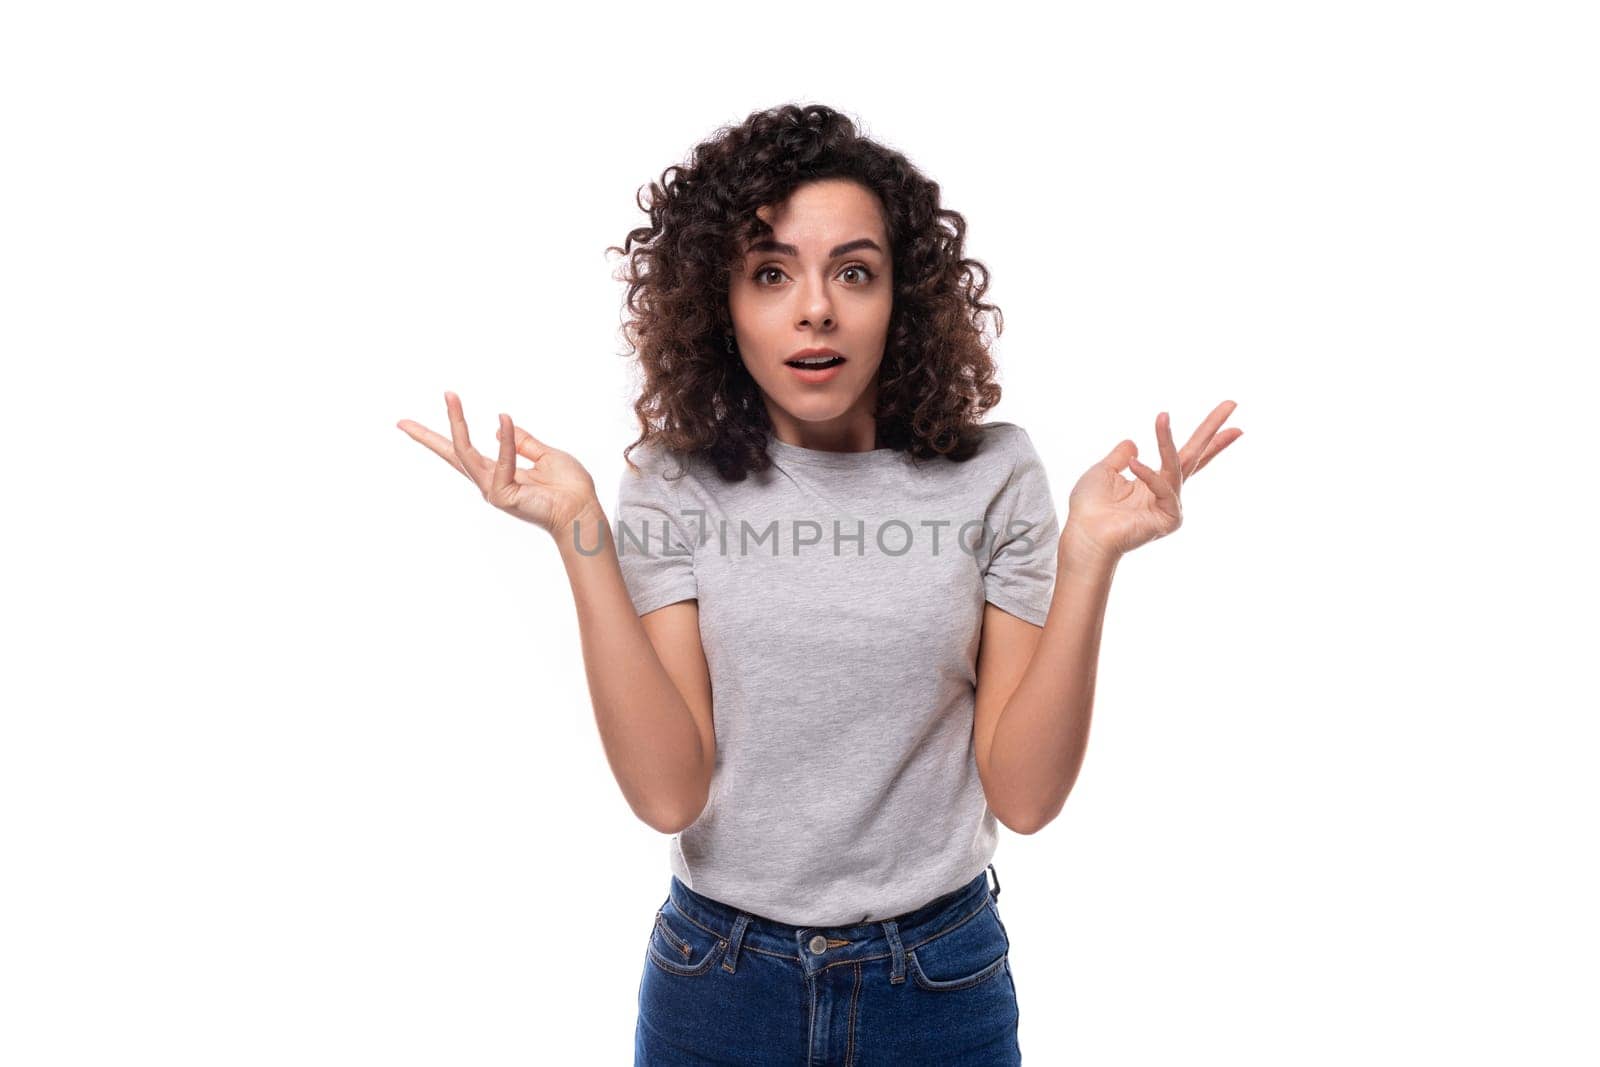 portrait of a cute slim young caucasian woman with careless black curly hair dressed in a gray t-shirt by TRMK